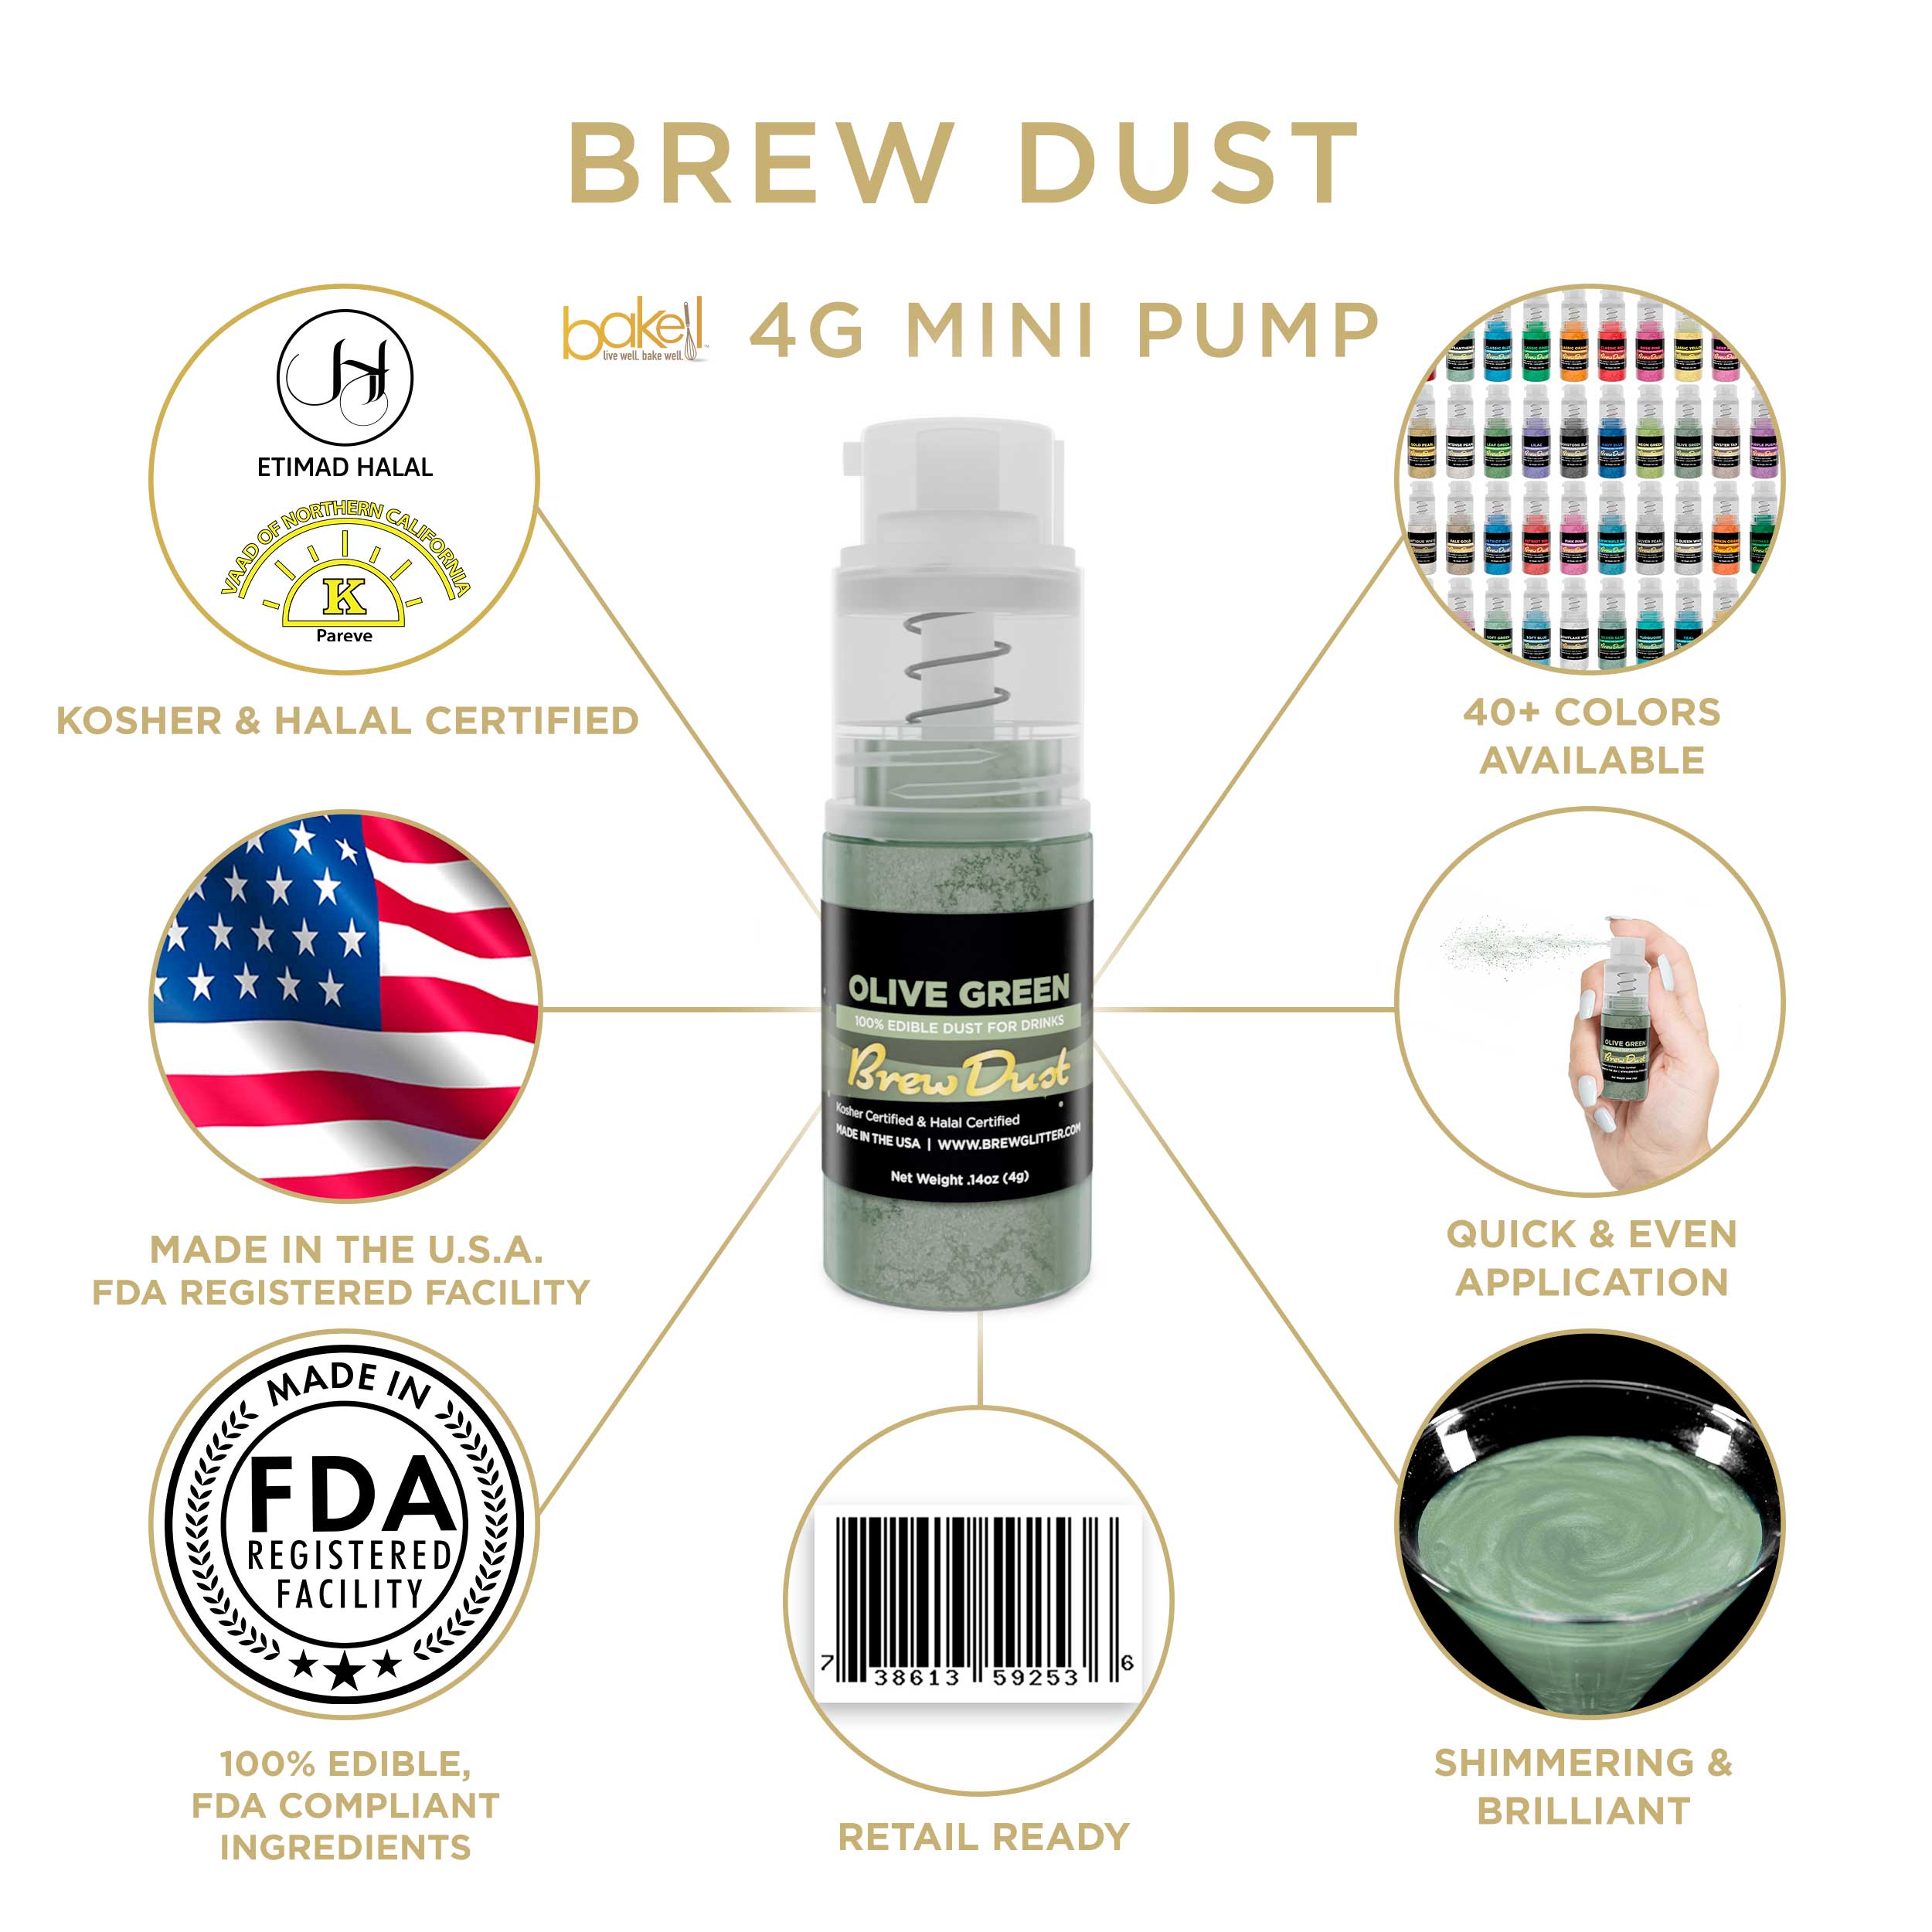 Olive Green Brew Dust Miniature Spray Pump | Infographic and Information